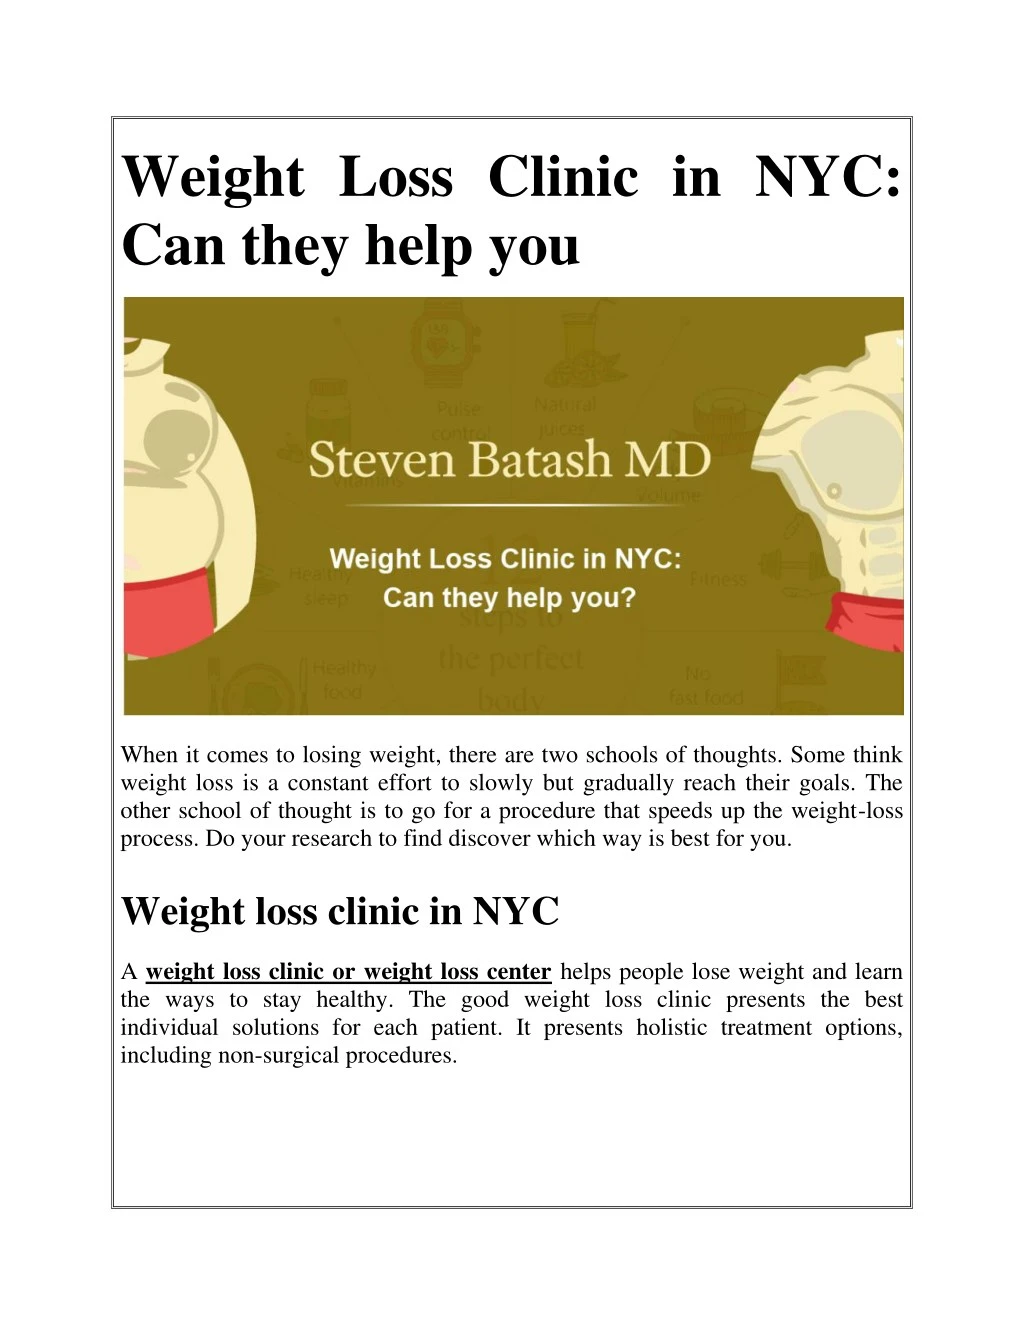 weight loss clinic in nyc can they help you